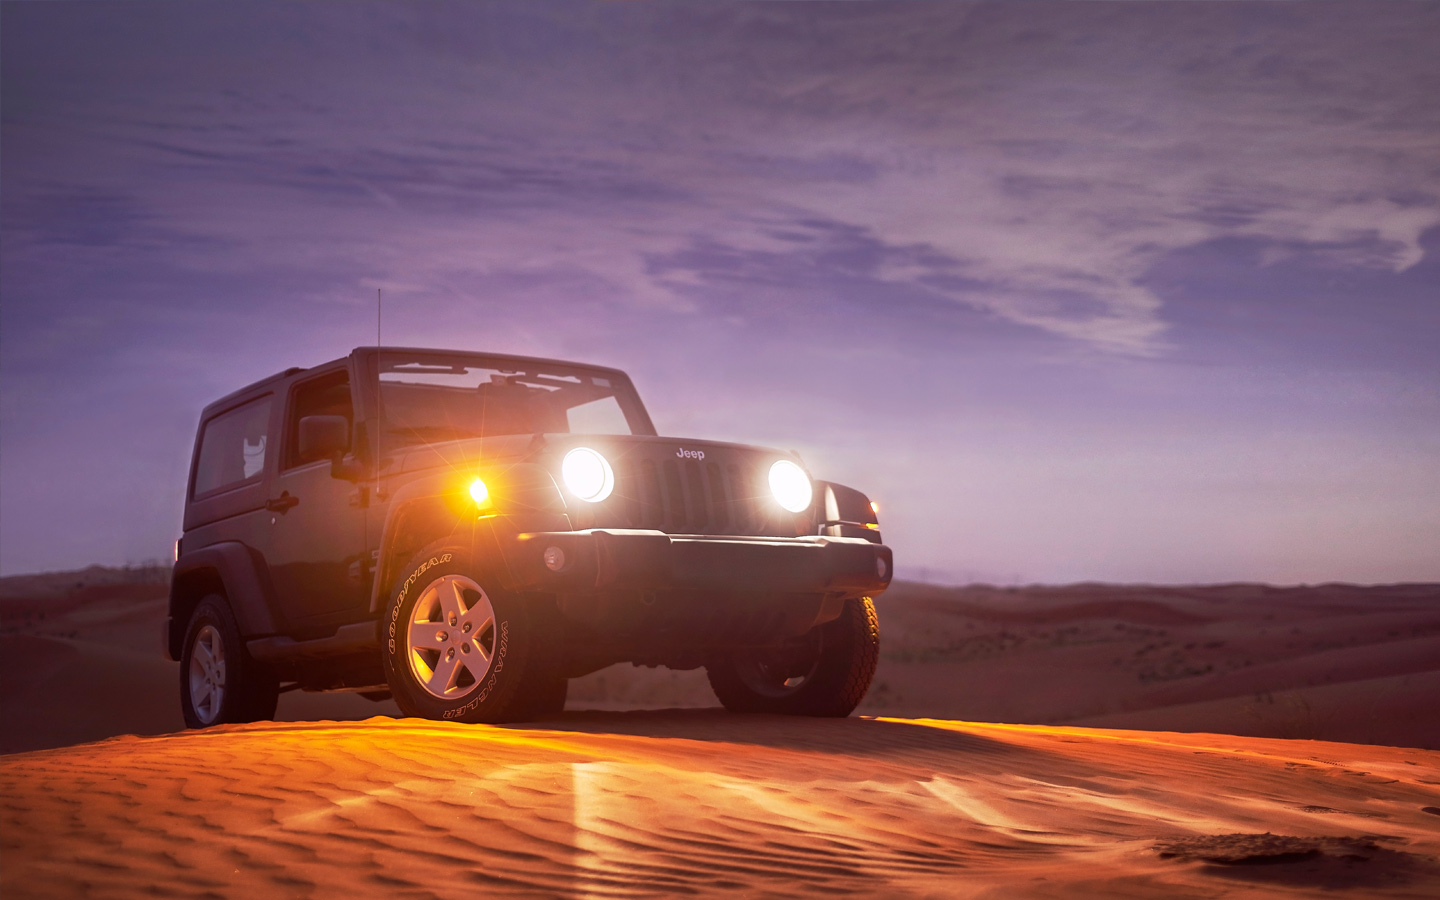 drive carefully, follow the tips to enjoy a hassle-free off-roading experience